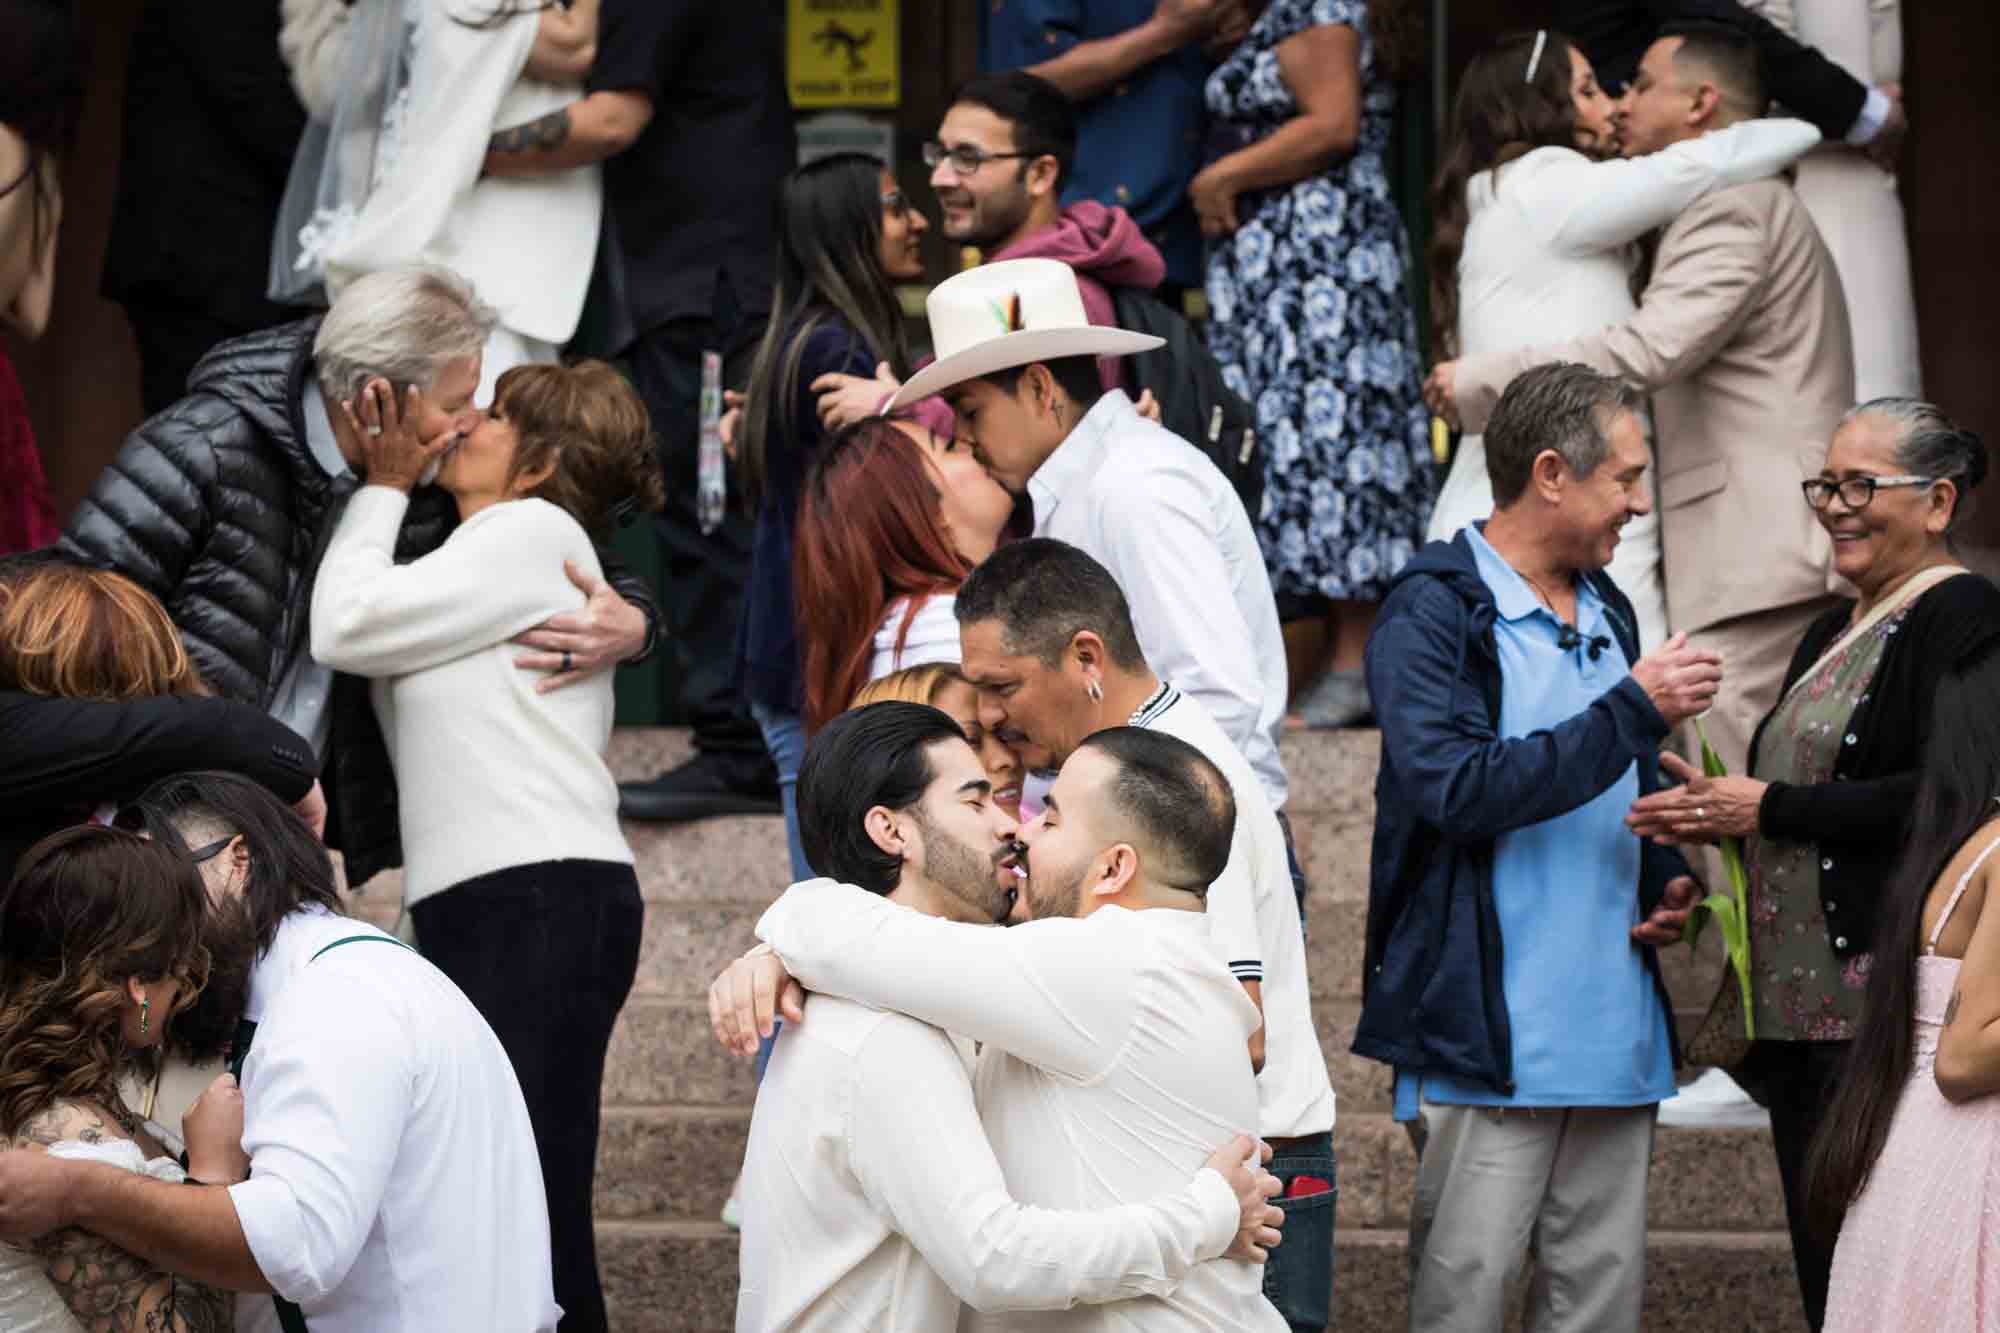 Crowd of bride and grooms kissing in front of courthouse steps at night for an article on the Bexar county mass wedding event